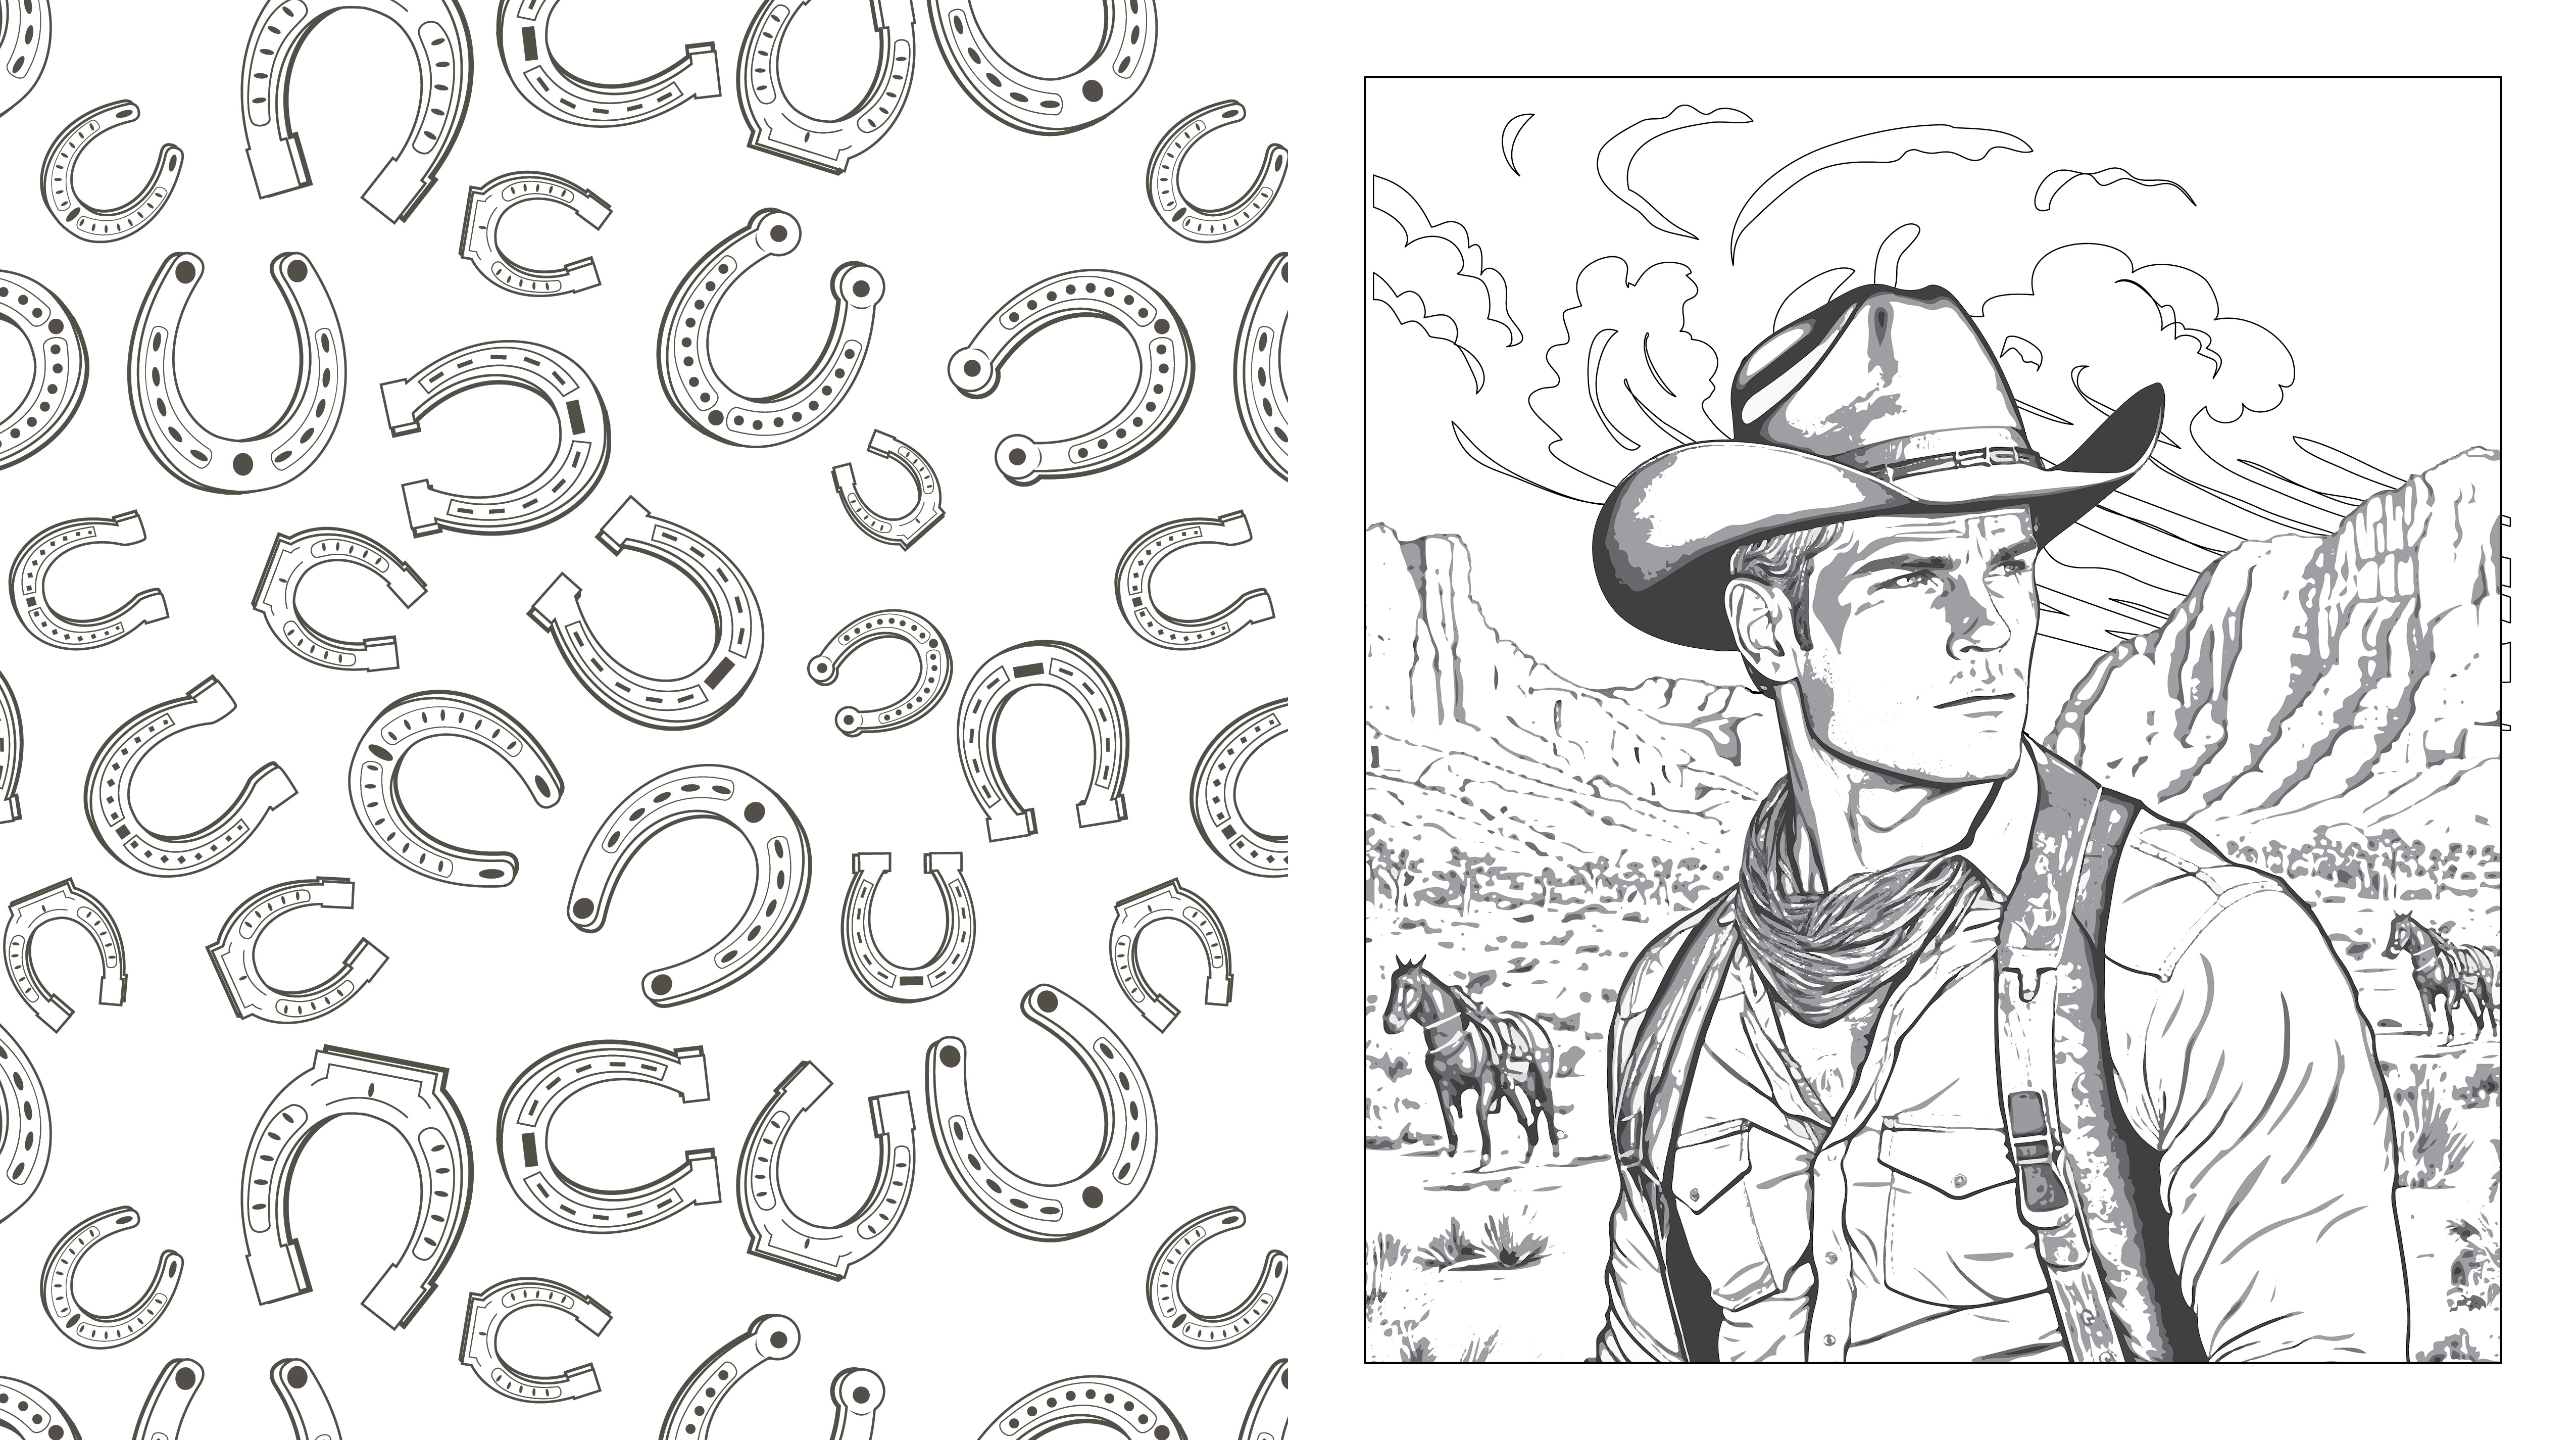 The american west coloring book by editors of chartwell books at a glance the group